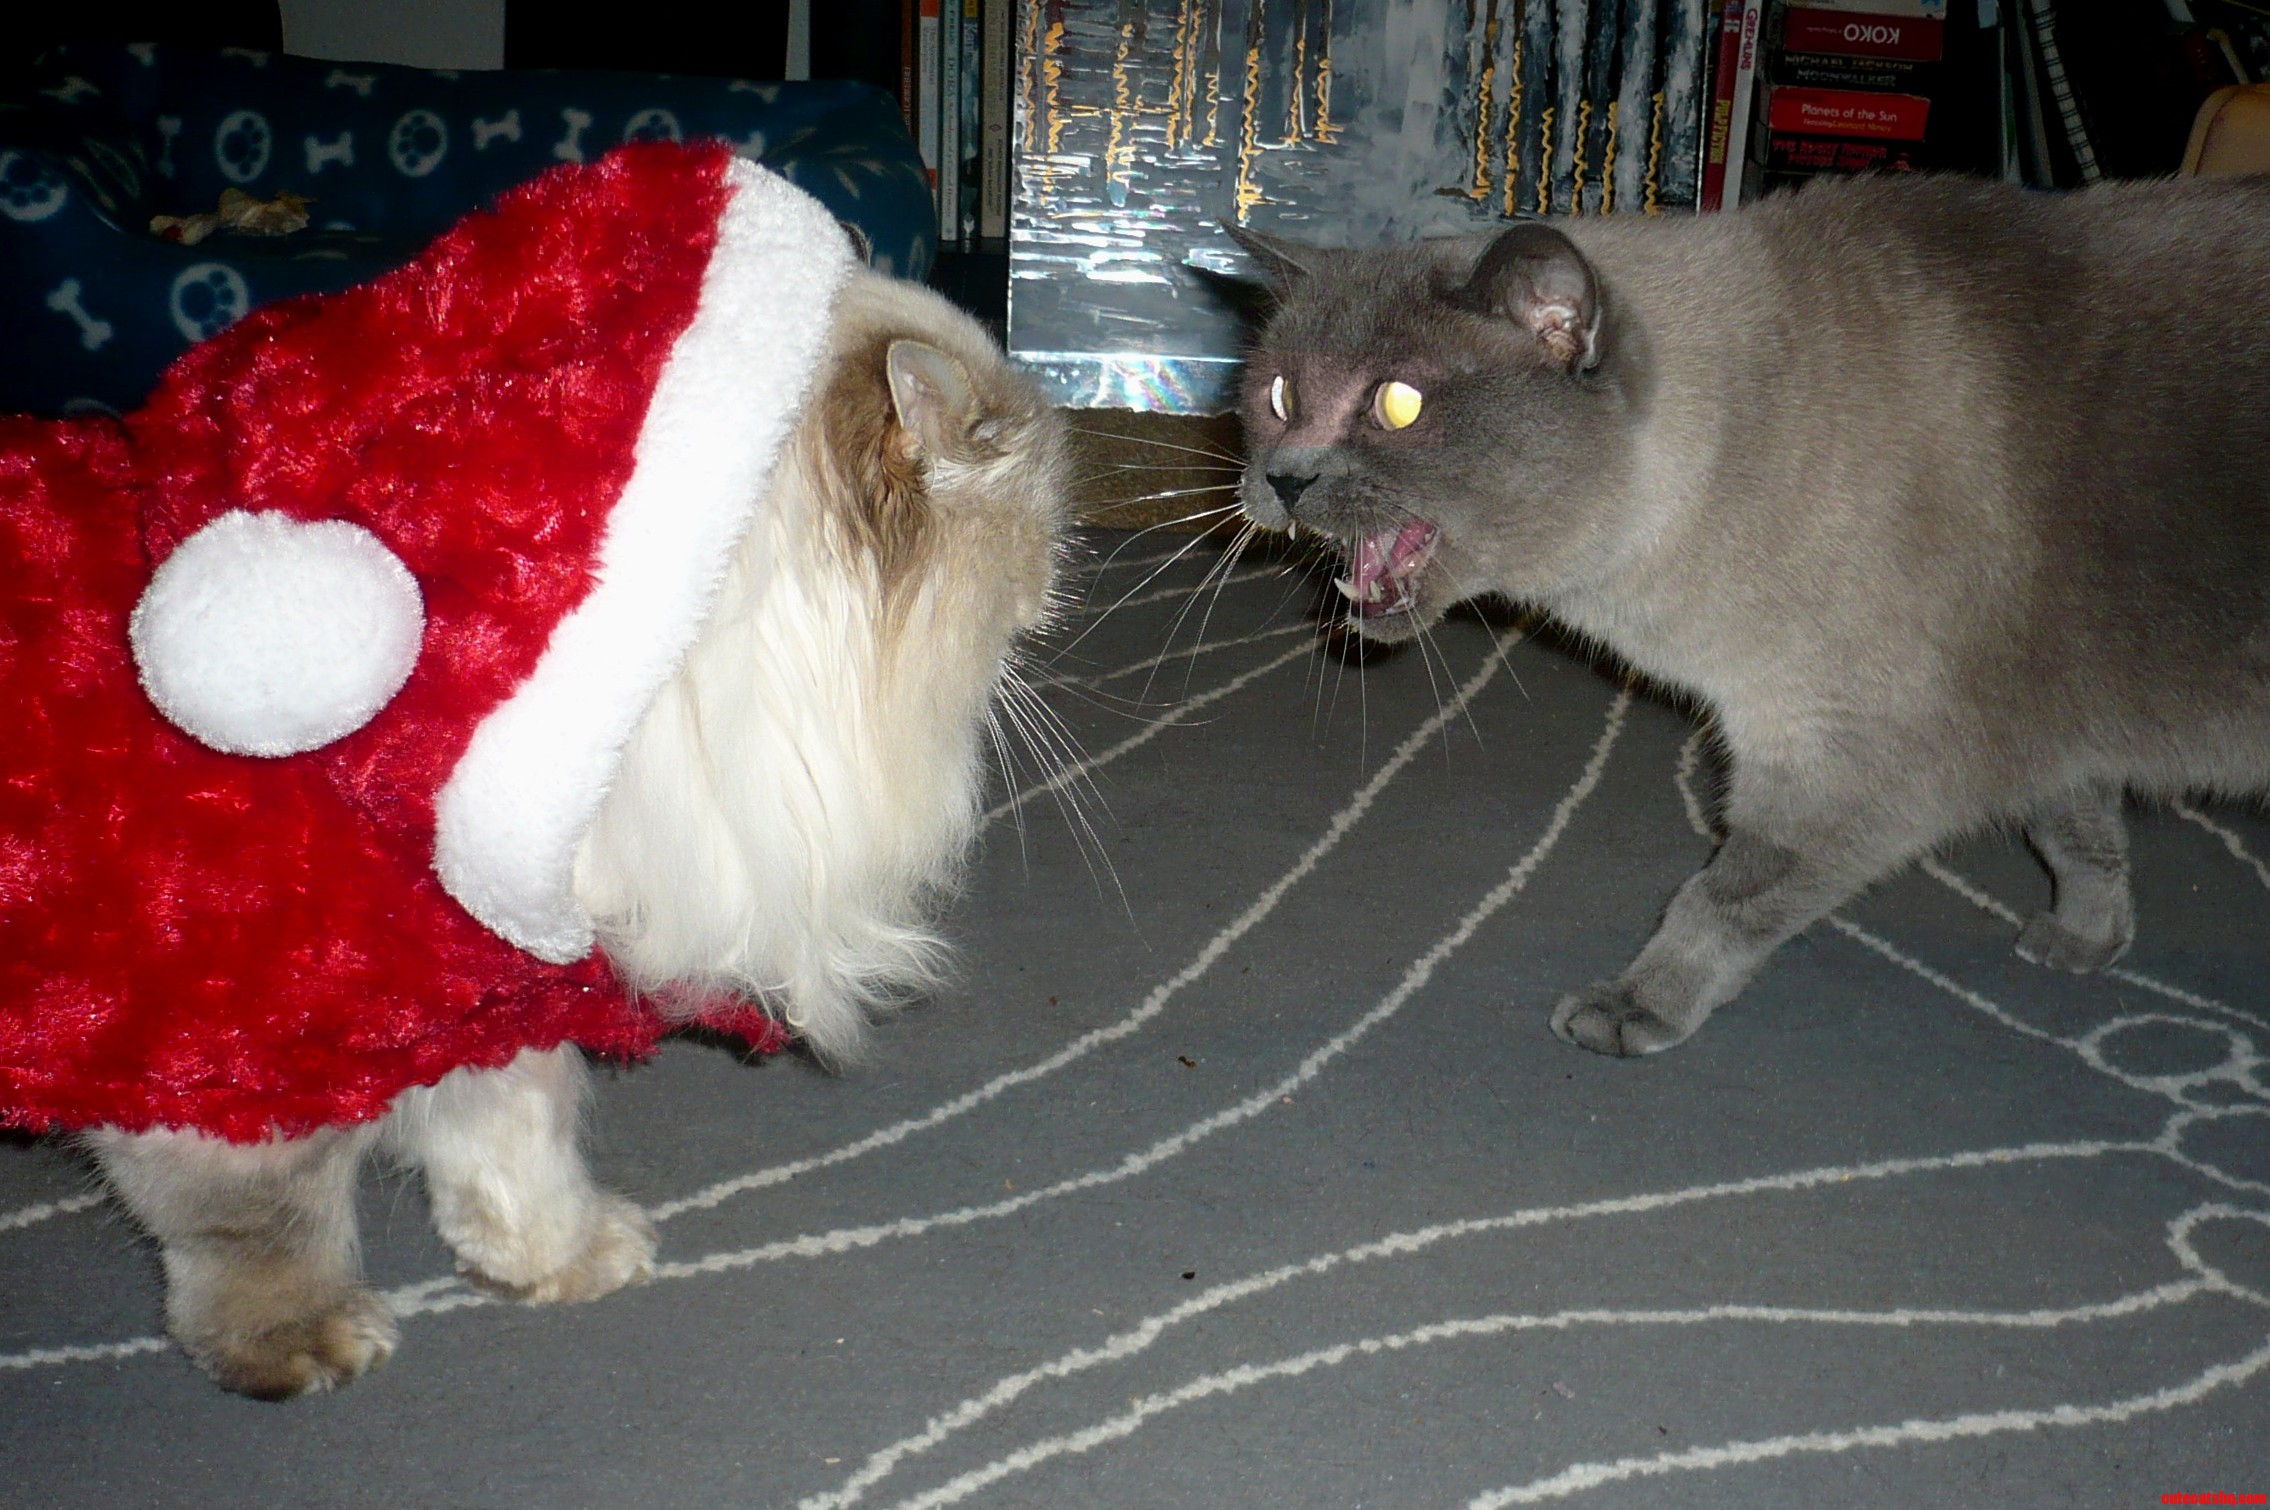 That Was Not Coal Merry Holidays From My Cats To Yours.